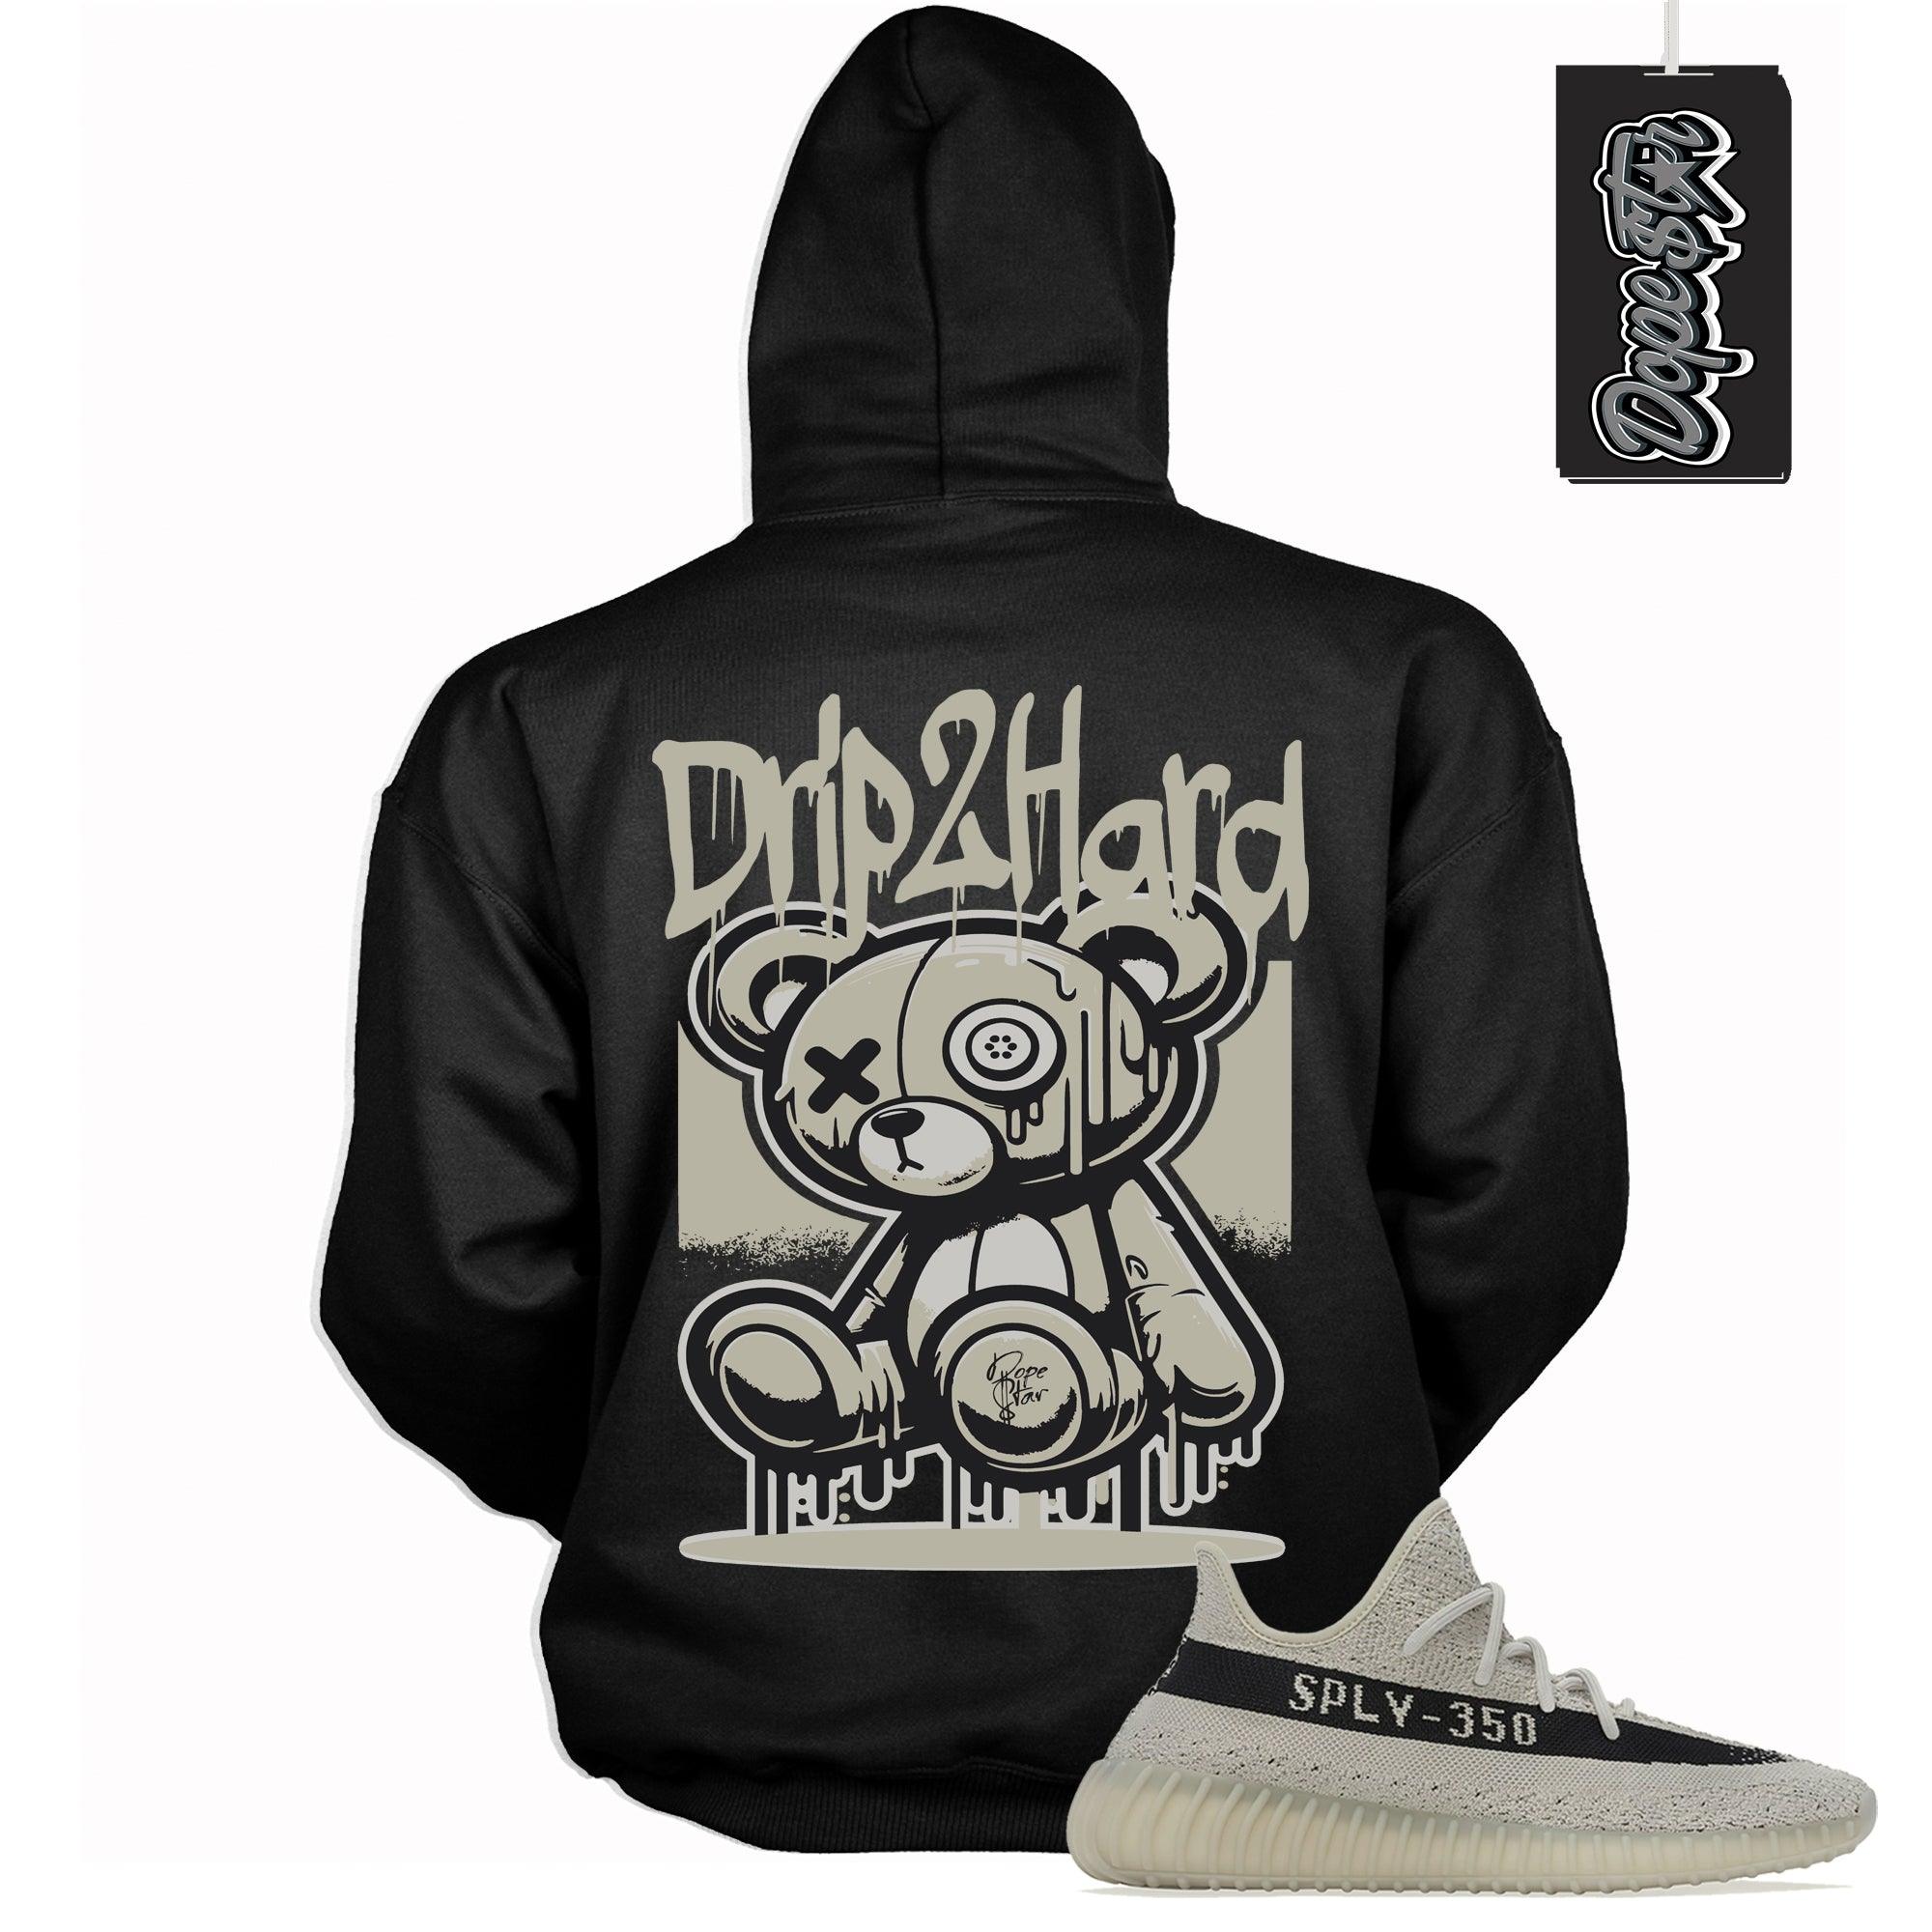 Cool Black Hoodie With Drip 2 Hard design That Perfectly Matches ADIDAS YEEZY BOOST 350 V2 SLATE Sneakers